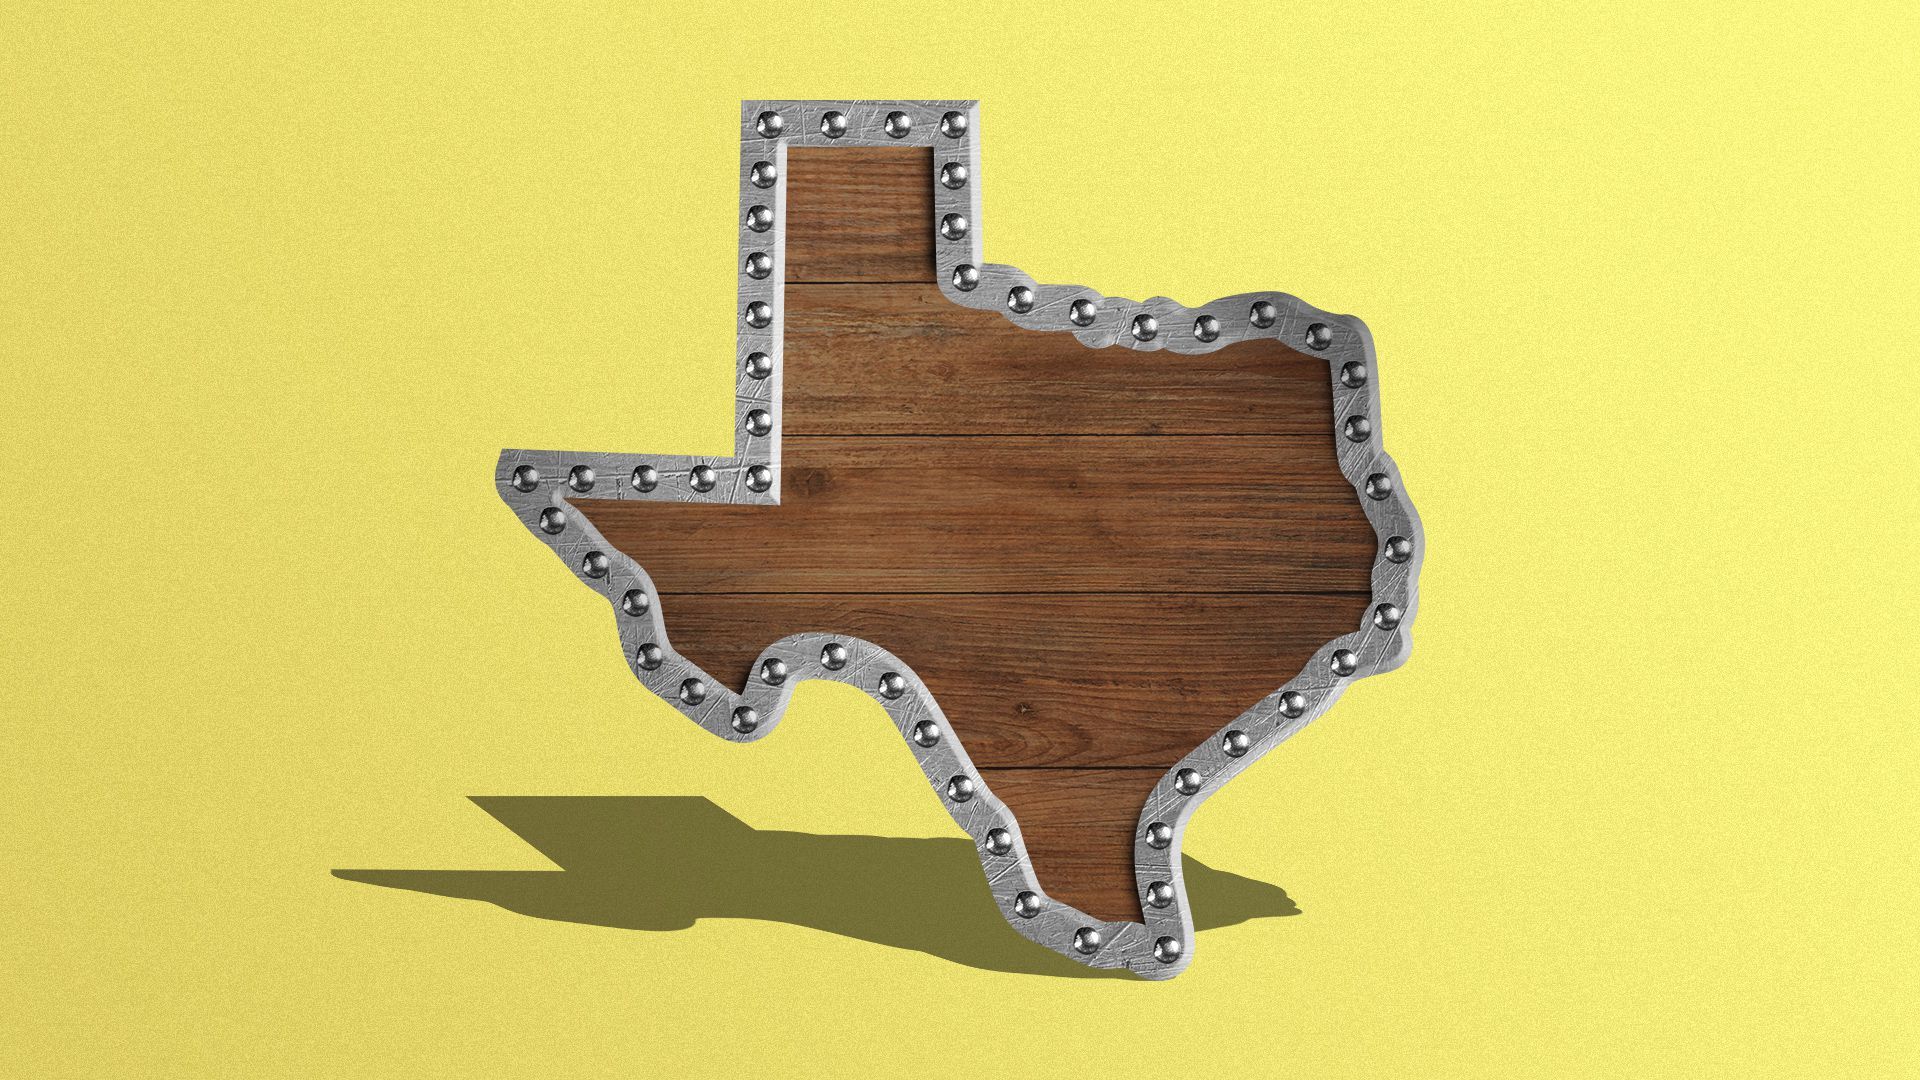 Illustration of a wooden shield in the shape of Texas. 